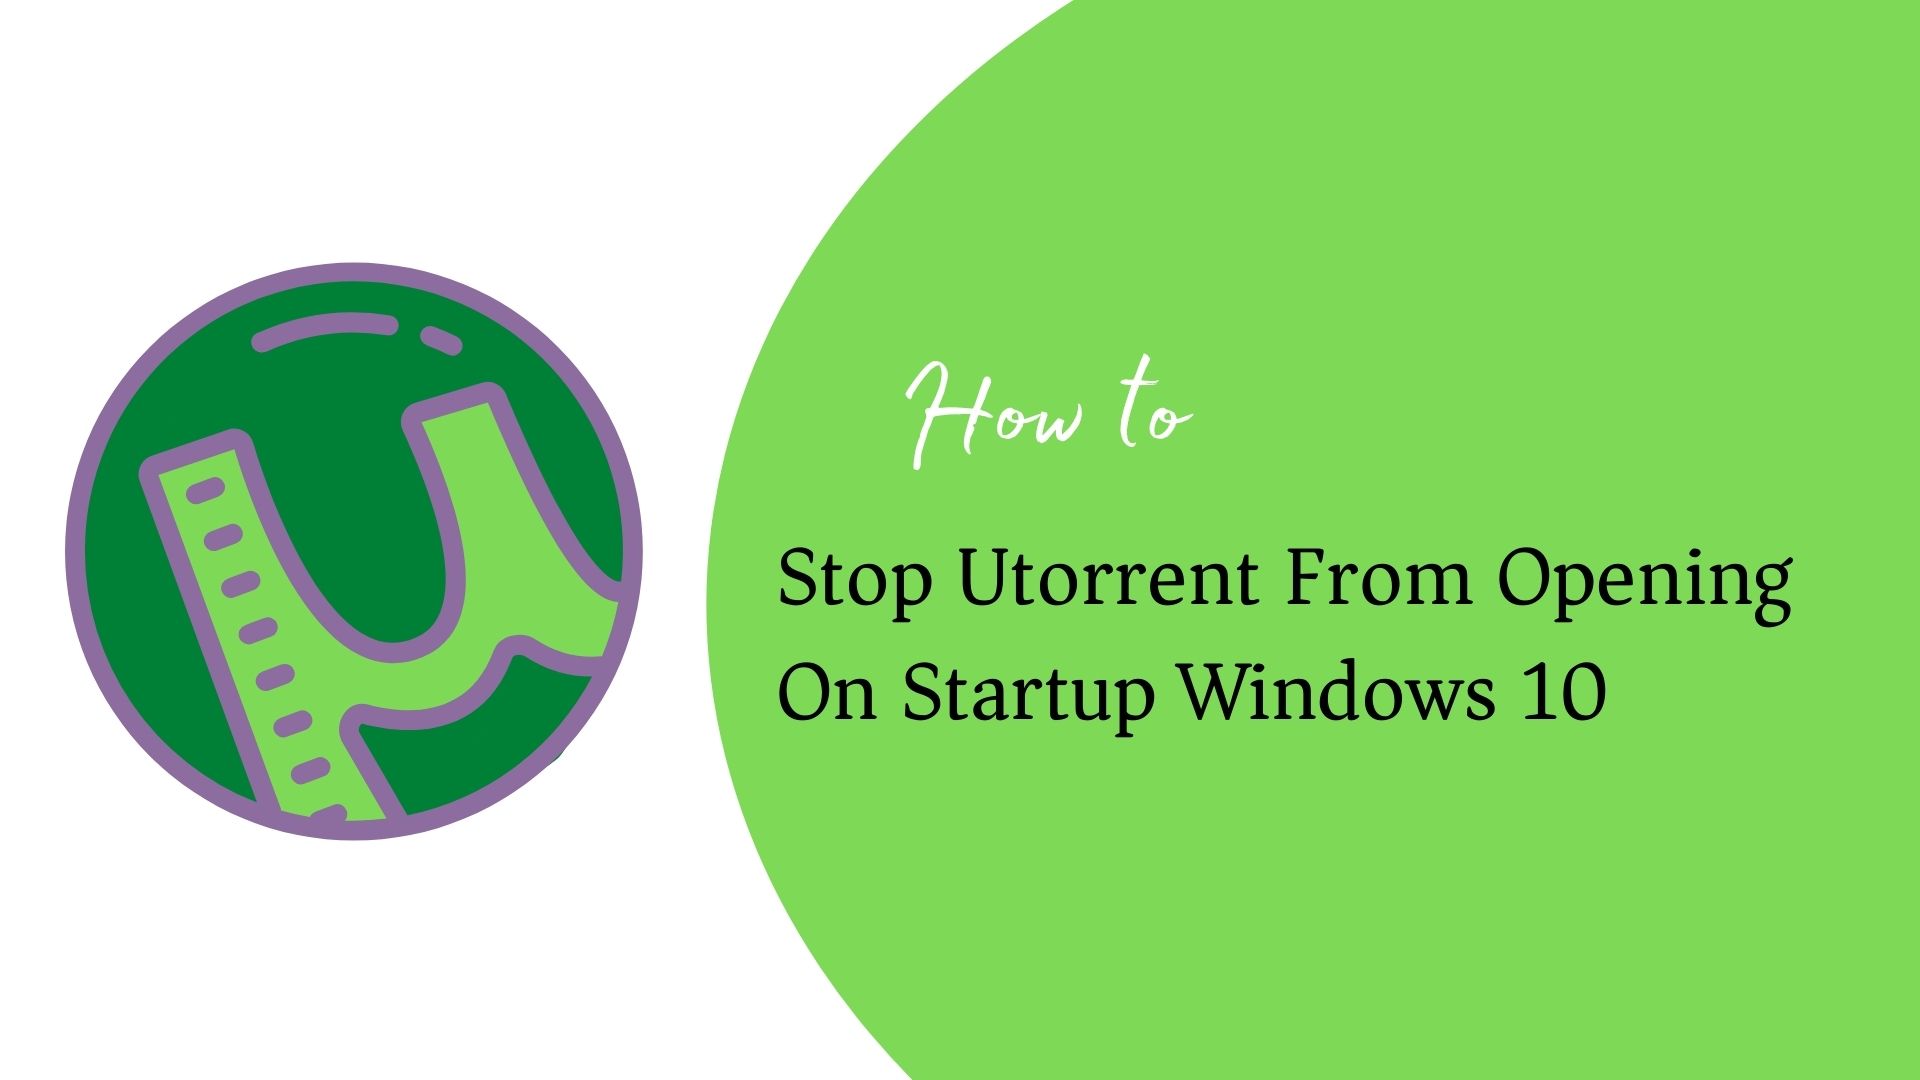 How to Stop Utorrent From Opening On Startup Windows 10